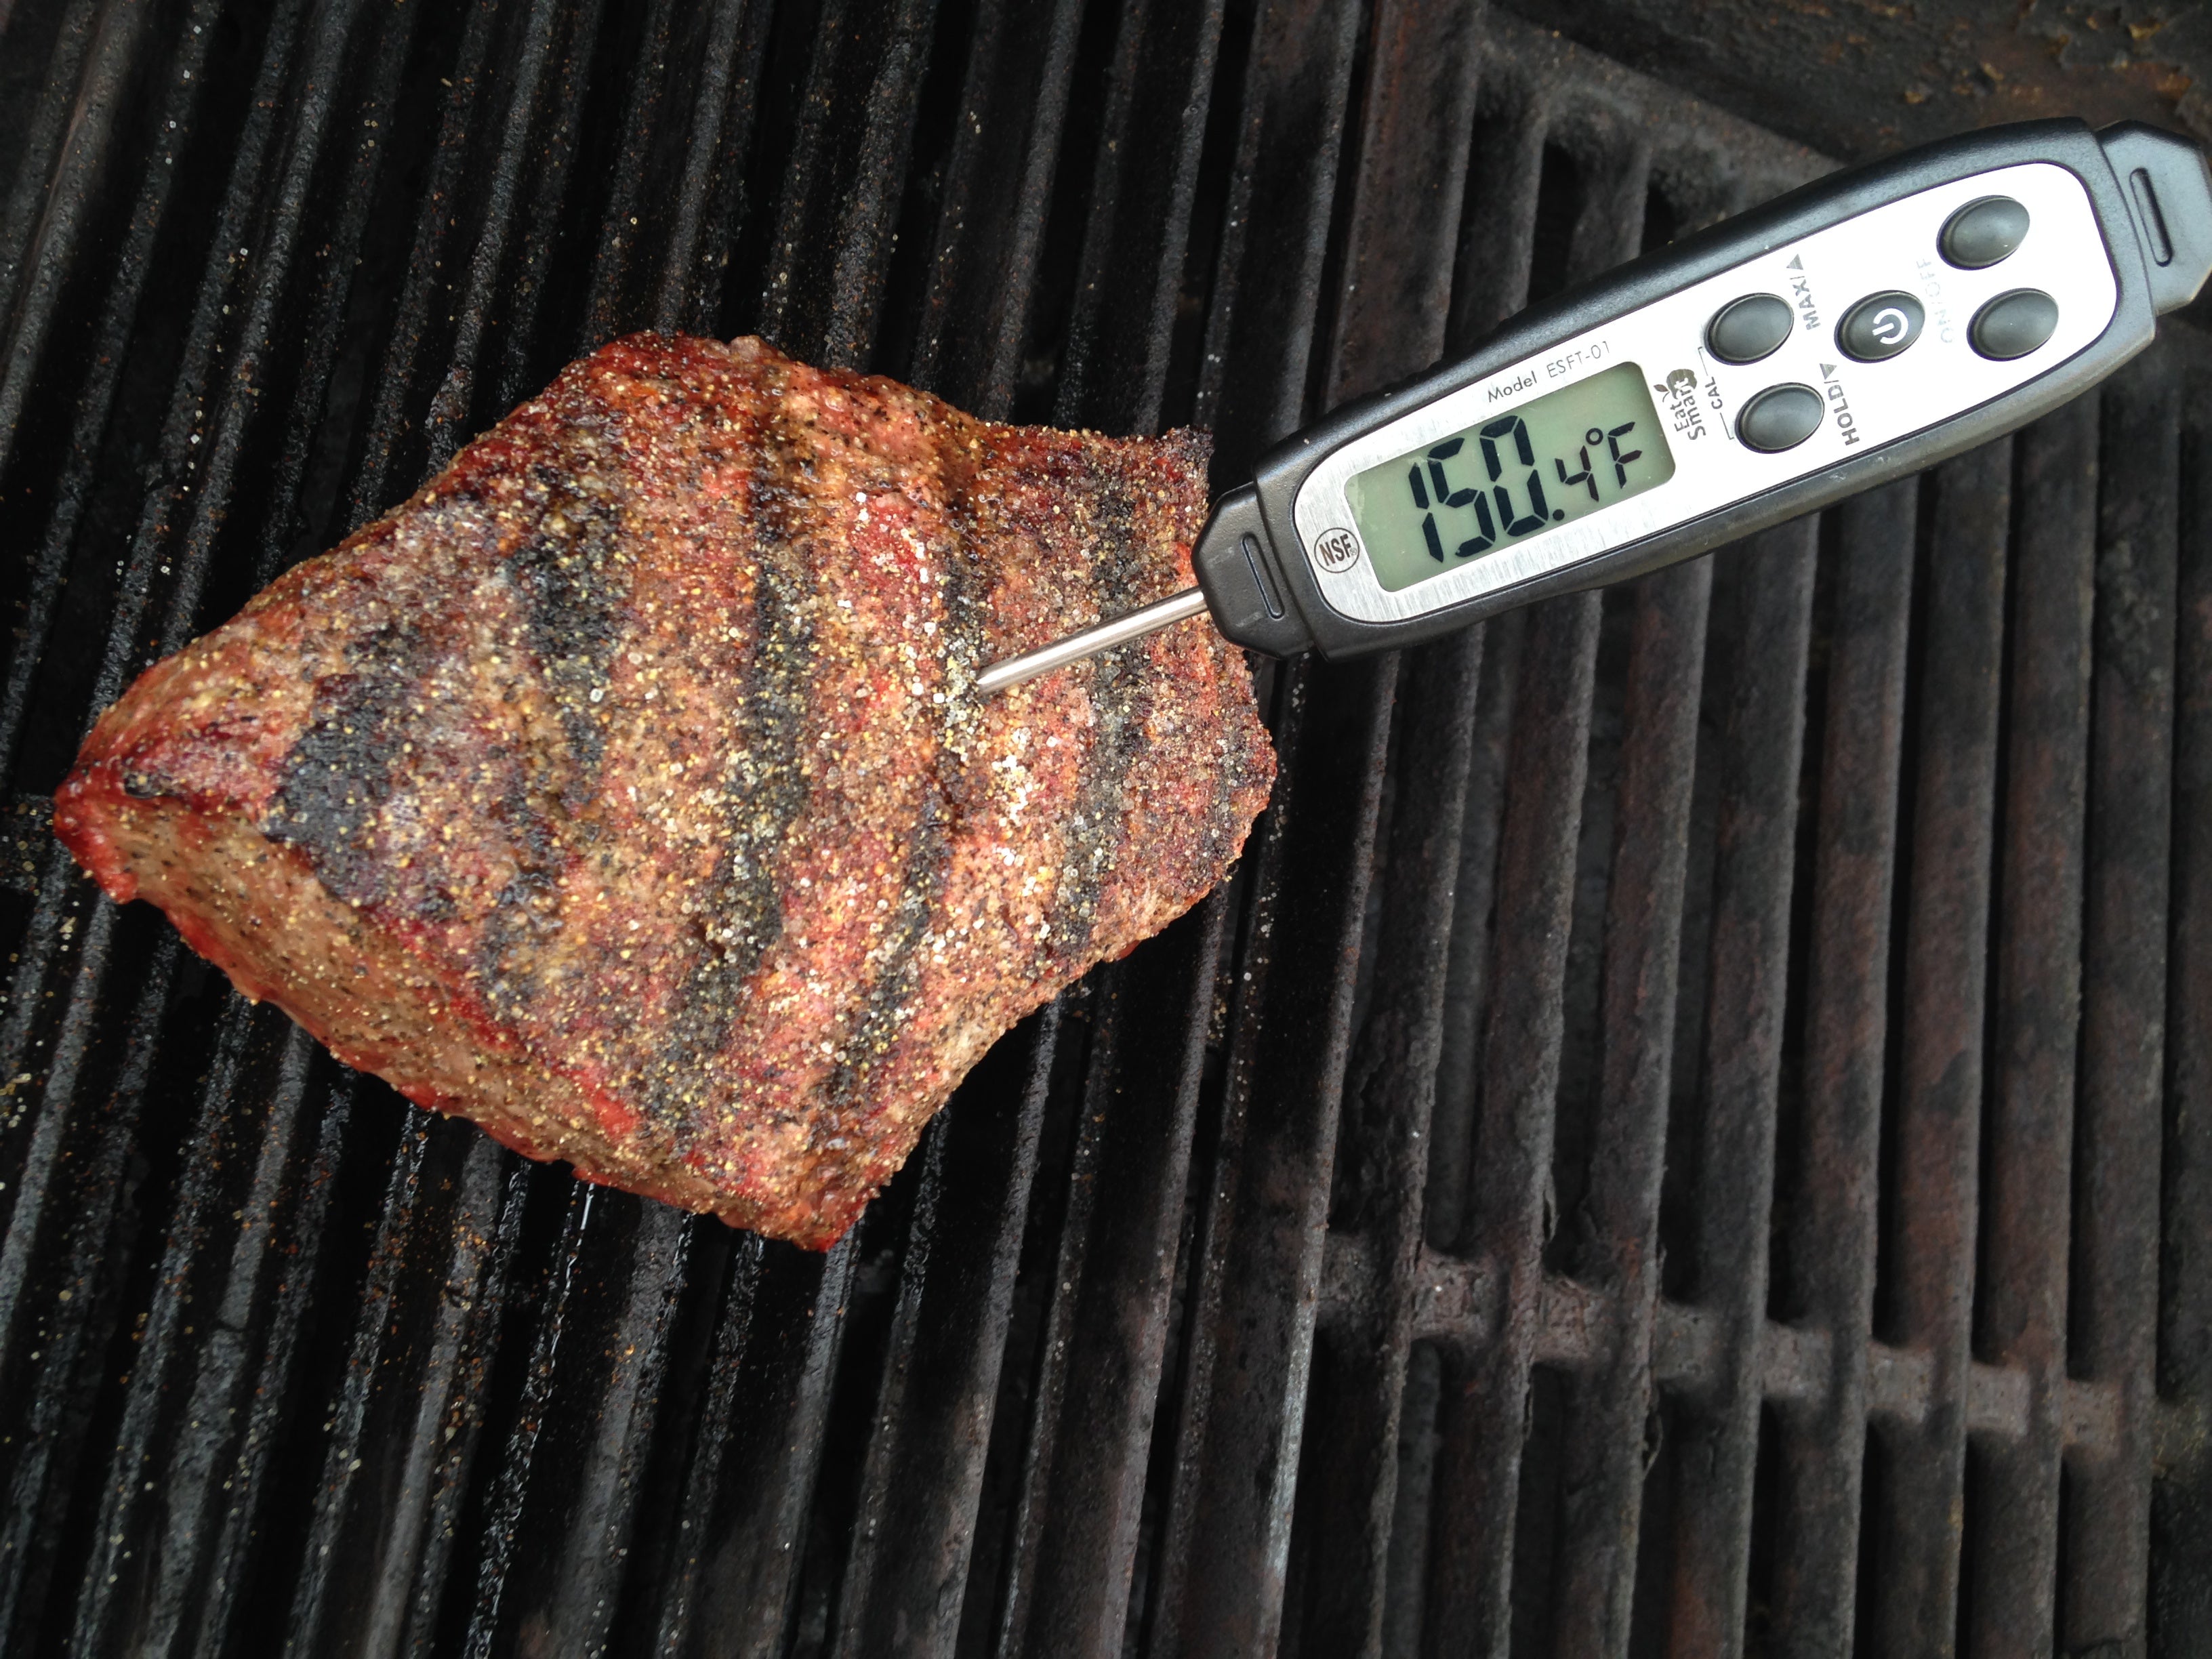 Whirlpool's smart thermometer ensures your food is cooked properly